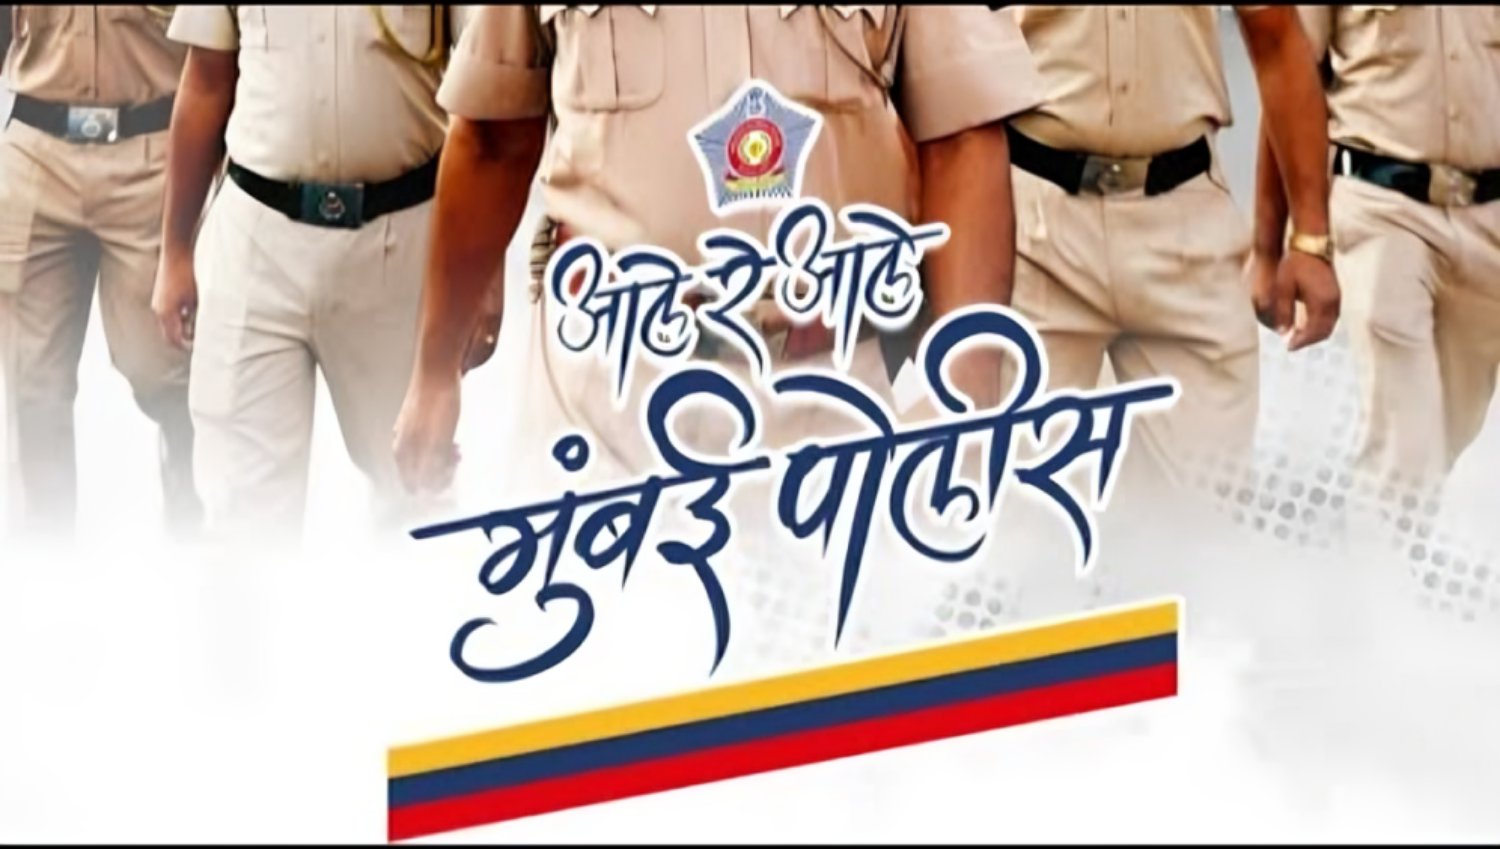 Ali Re Ali Mumbai Police! This song, composed for Mayanagari Supercops, is going viral on social media की तस्वीर